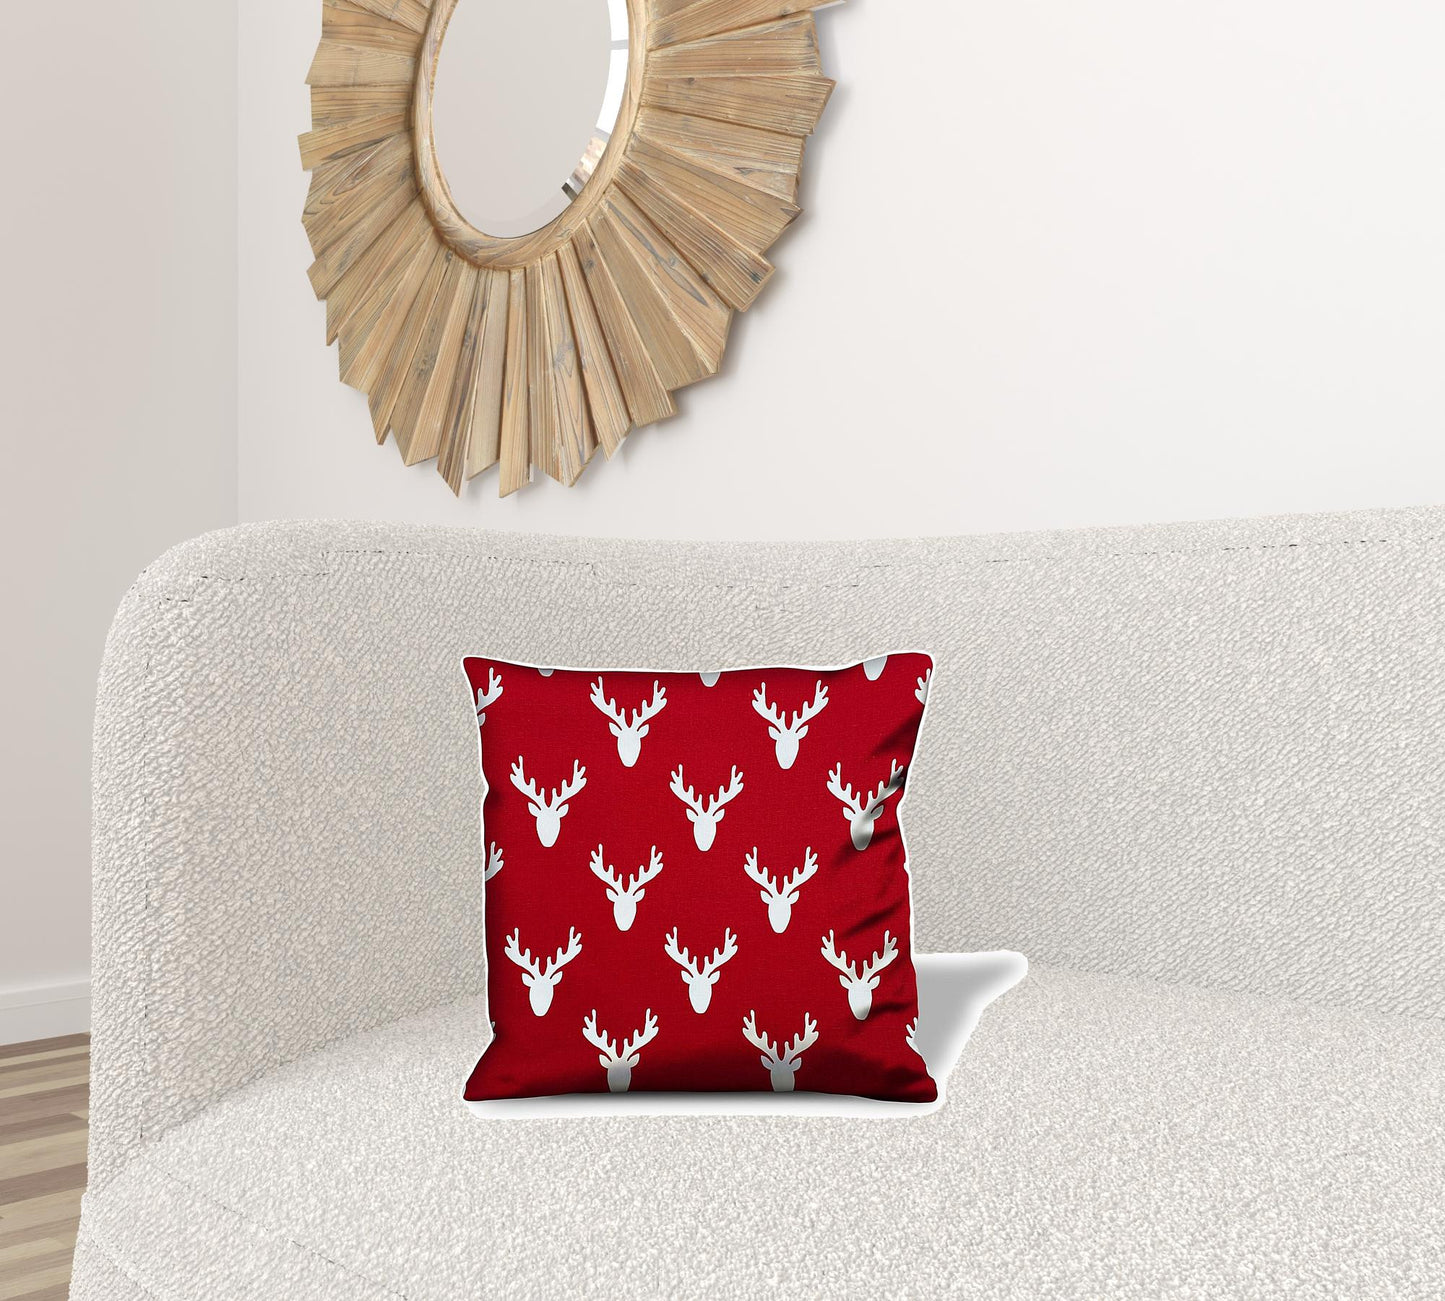 17" X 17" Red Gray And White Reindeer Zippered 100% Cotton Animal Print Throw Pillow Cover